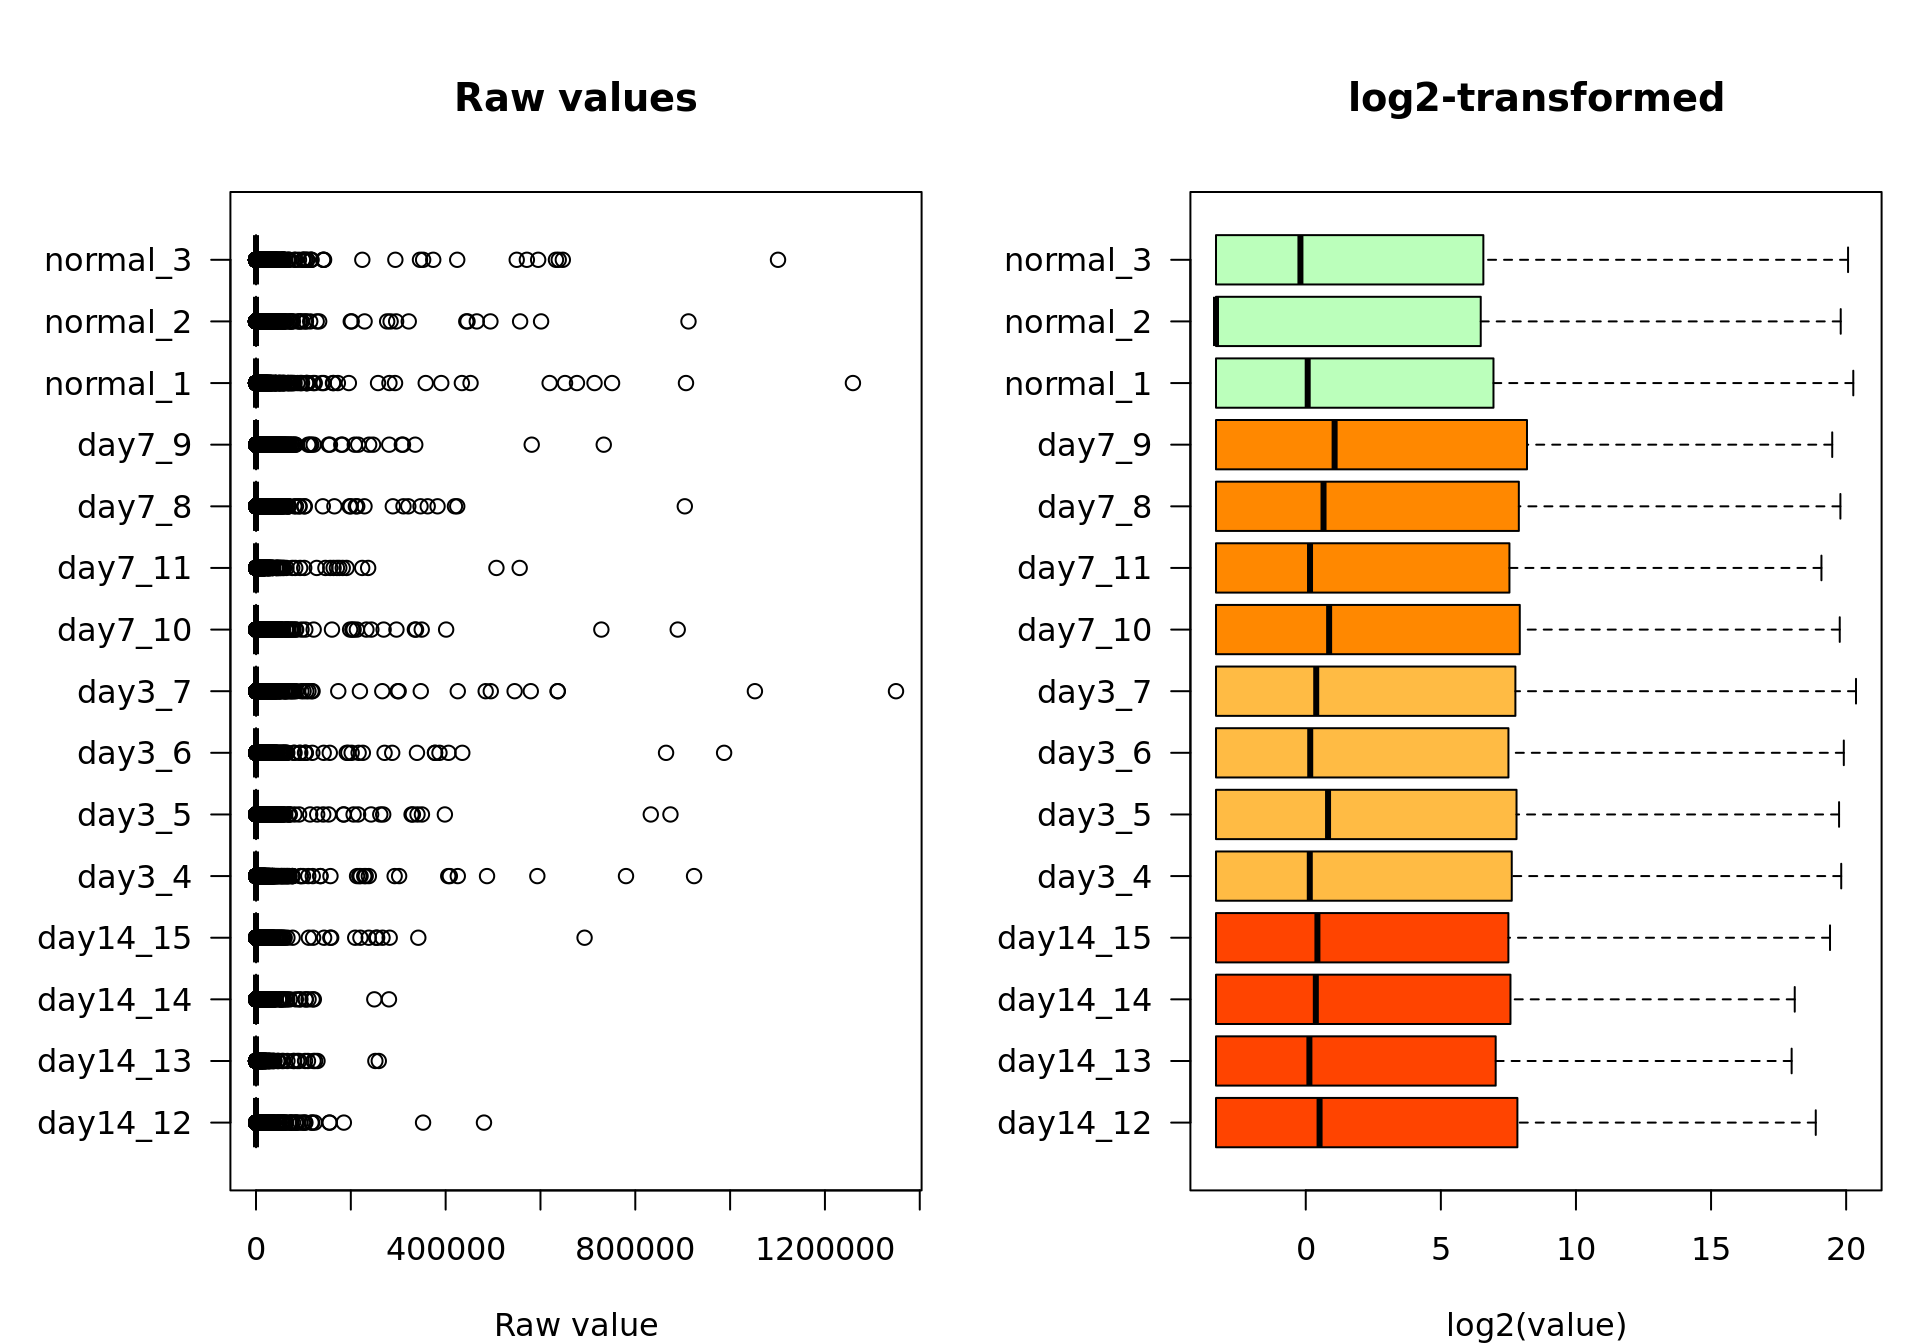 Box plot of the raw values (left) and log2-transformed values (right)